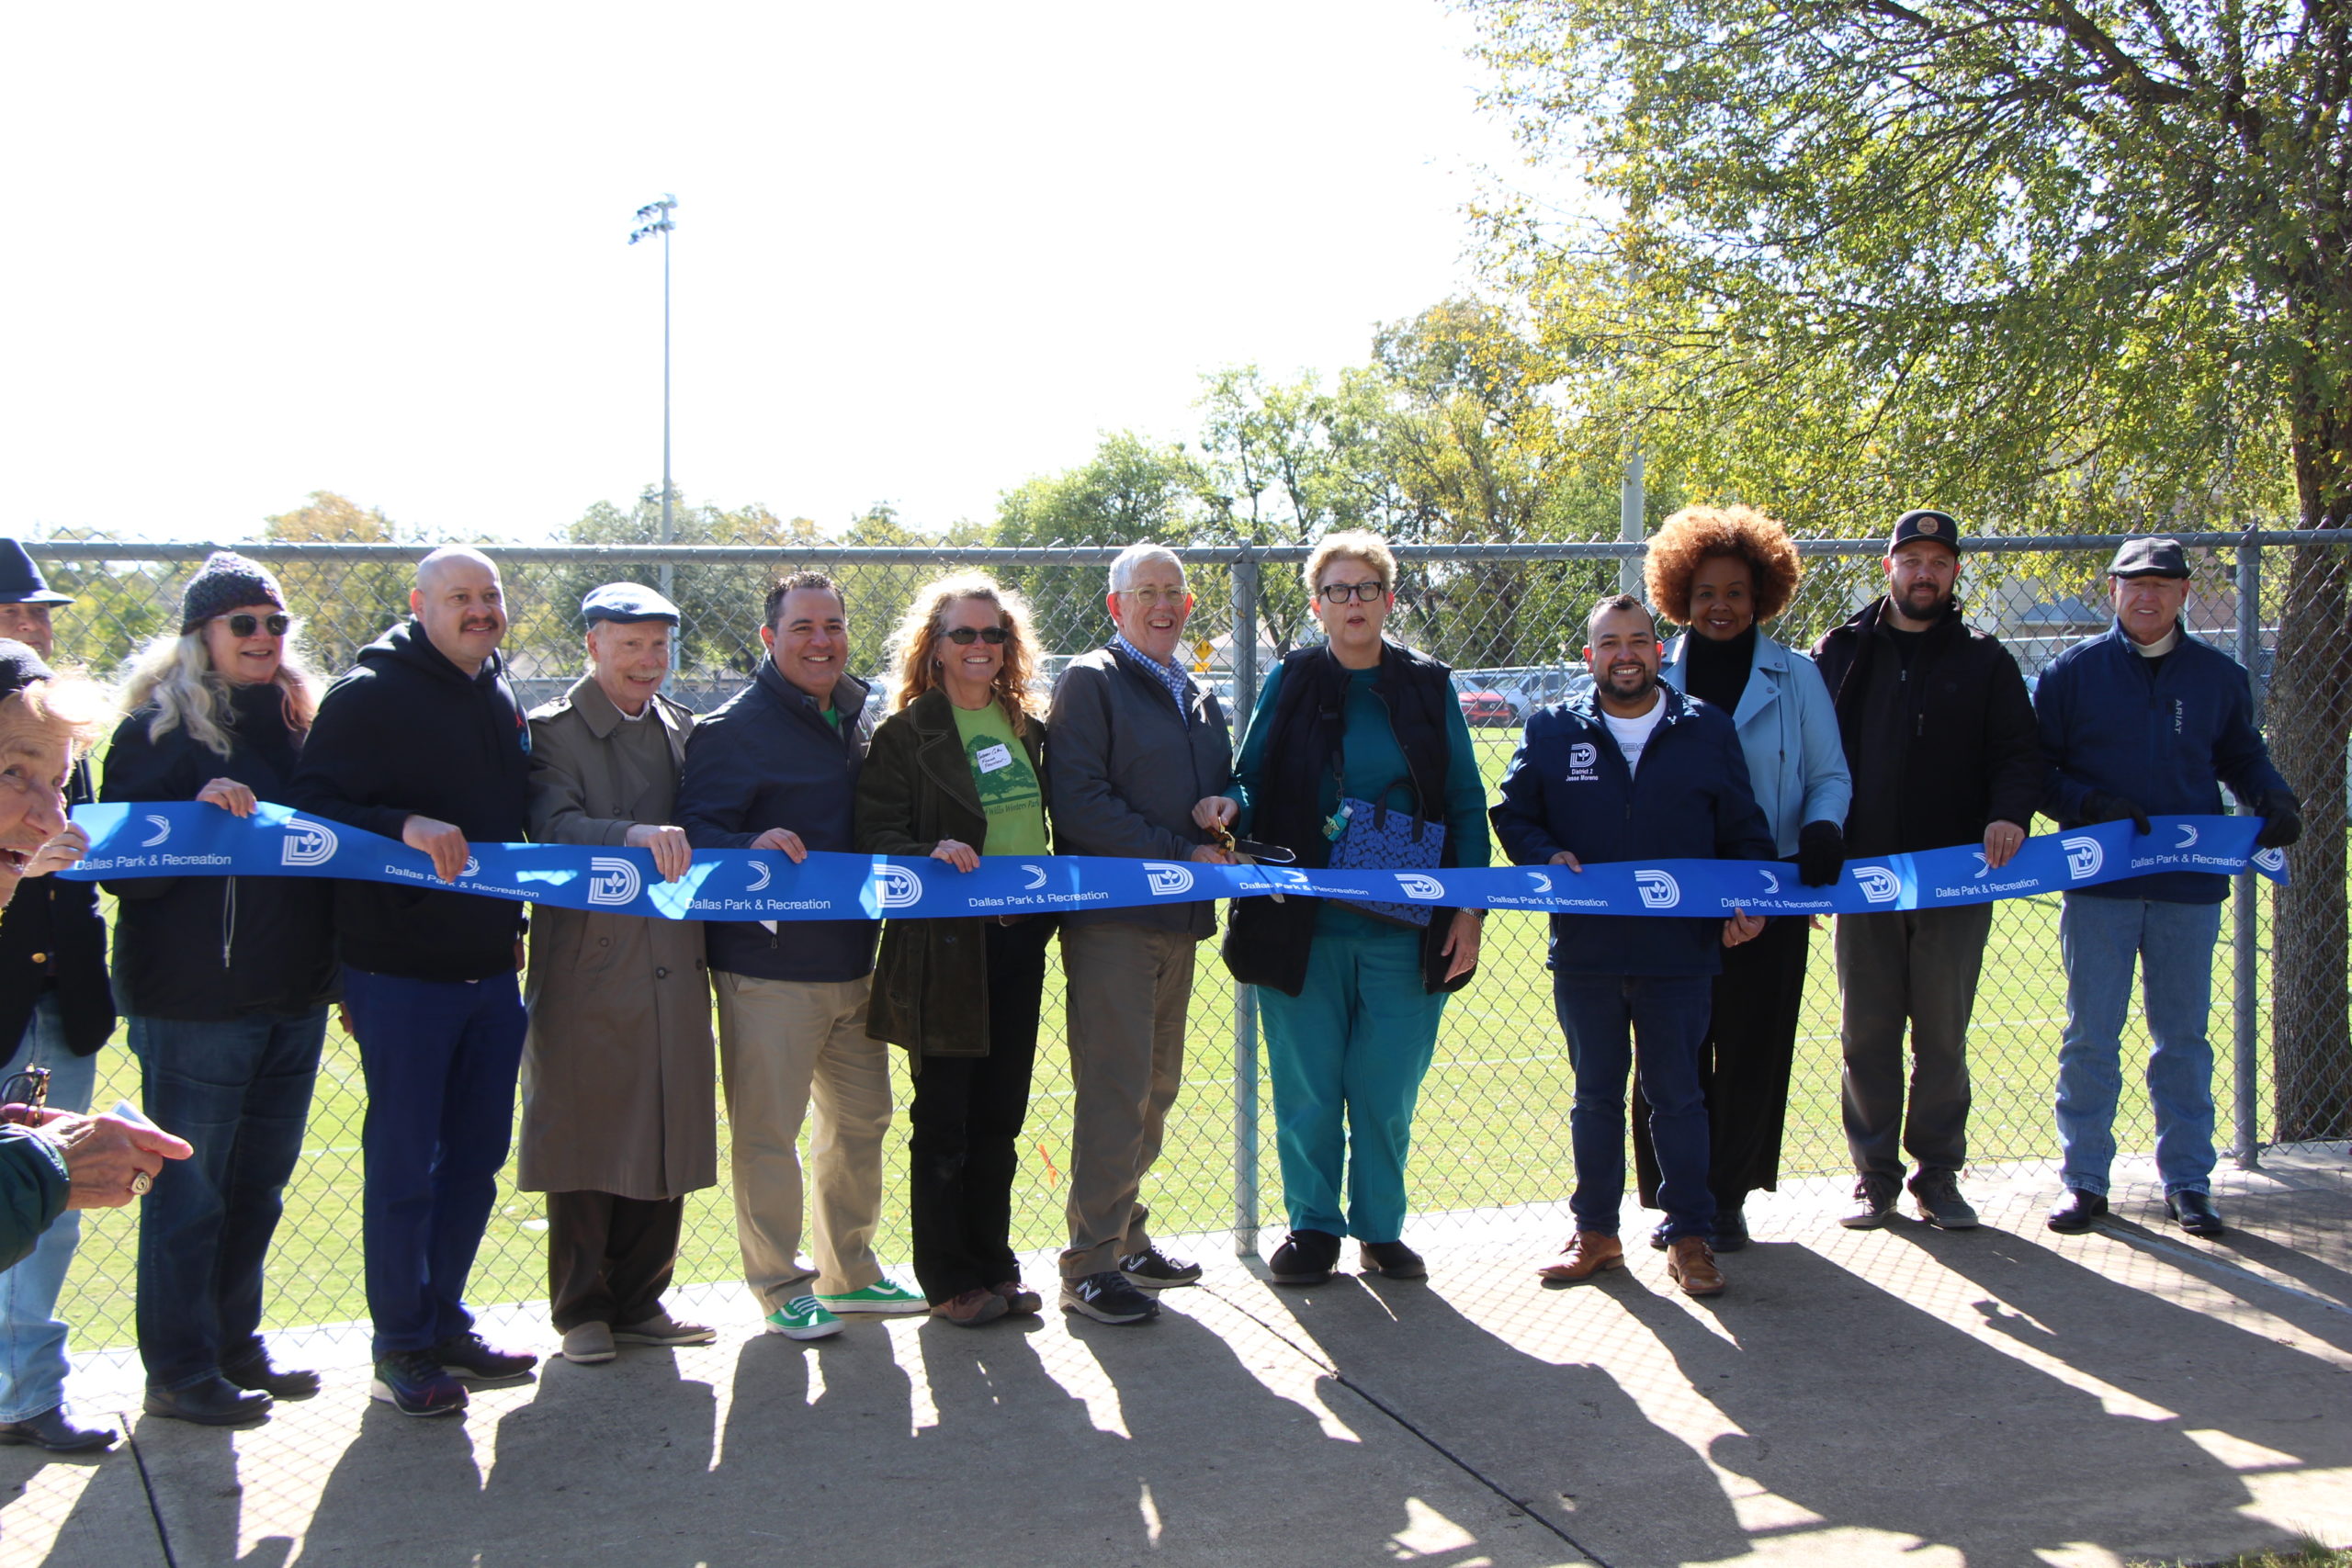 Stakeholders cut the ribbon on the renovated soccer field at Willis Winters Park